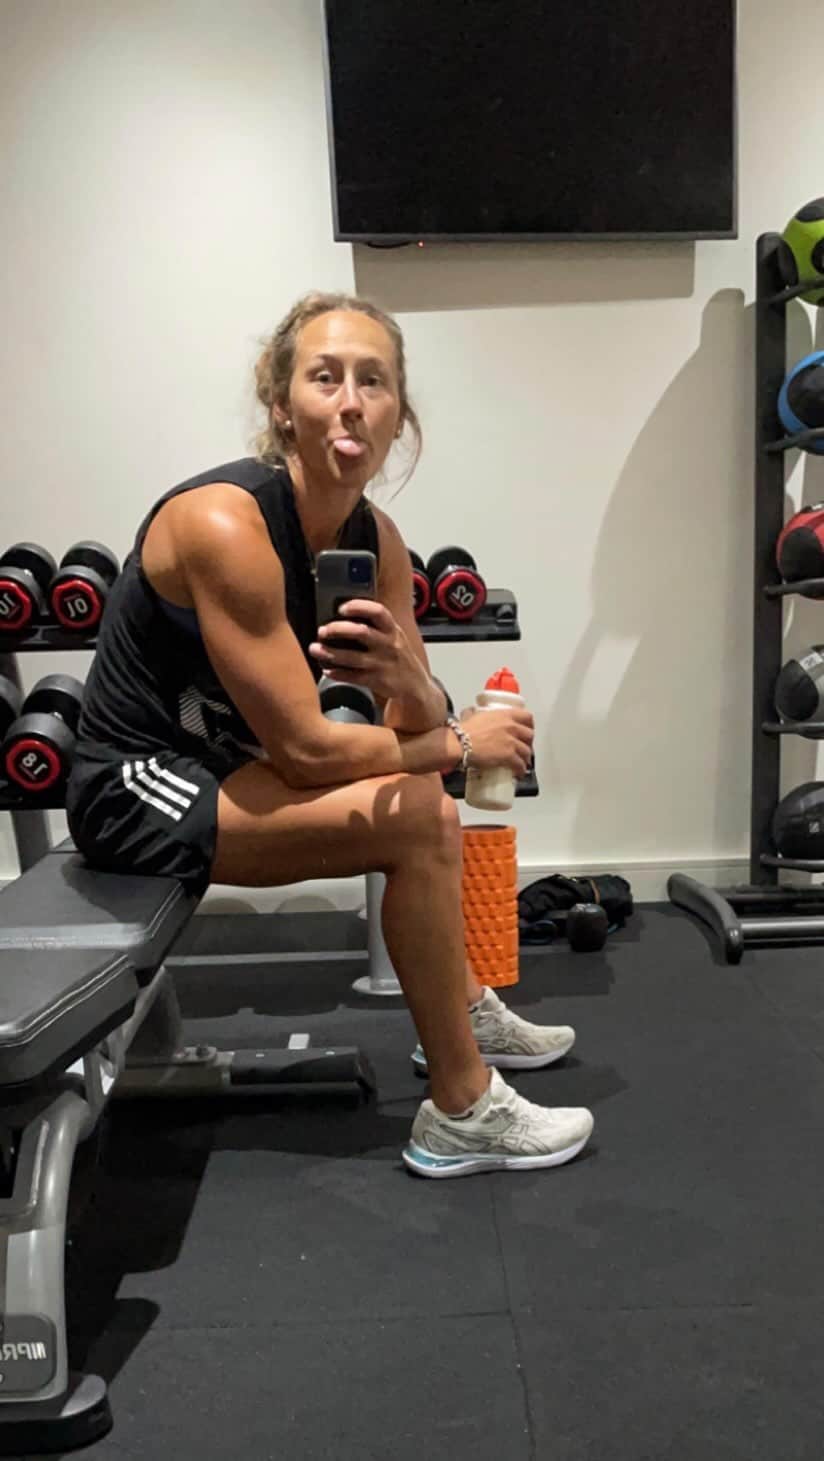 Tori Peetersのインスタグラム：「Does anyone else just love the grind??   I’m only 2 days into rest week and I’m already getting itchy.. any suggestions out there?? 🙃😅  #restweek #suggestions #advice #yourthoughts #thegrind #missitalready #seasonprep #gymlife #javelinthrower #fomo #strengthgains #specifics #eccentrics #trainingideas #strongfemales #variety #keepworking #feelgood #sportsfuelathelete #poweredbypics」